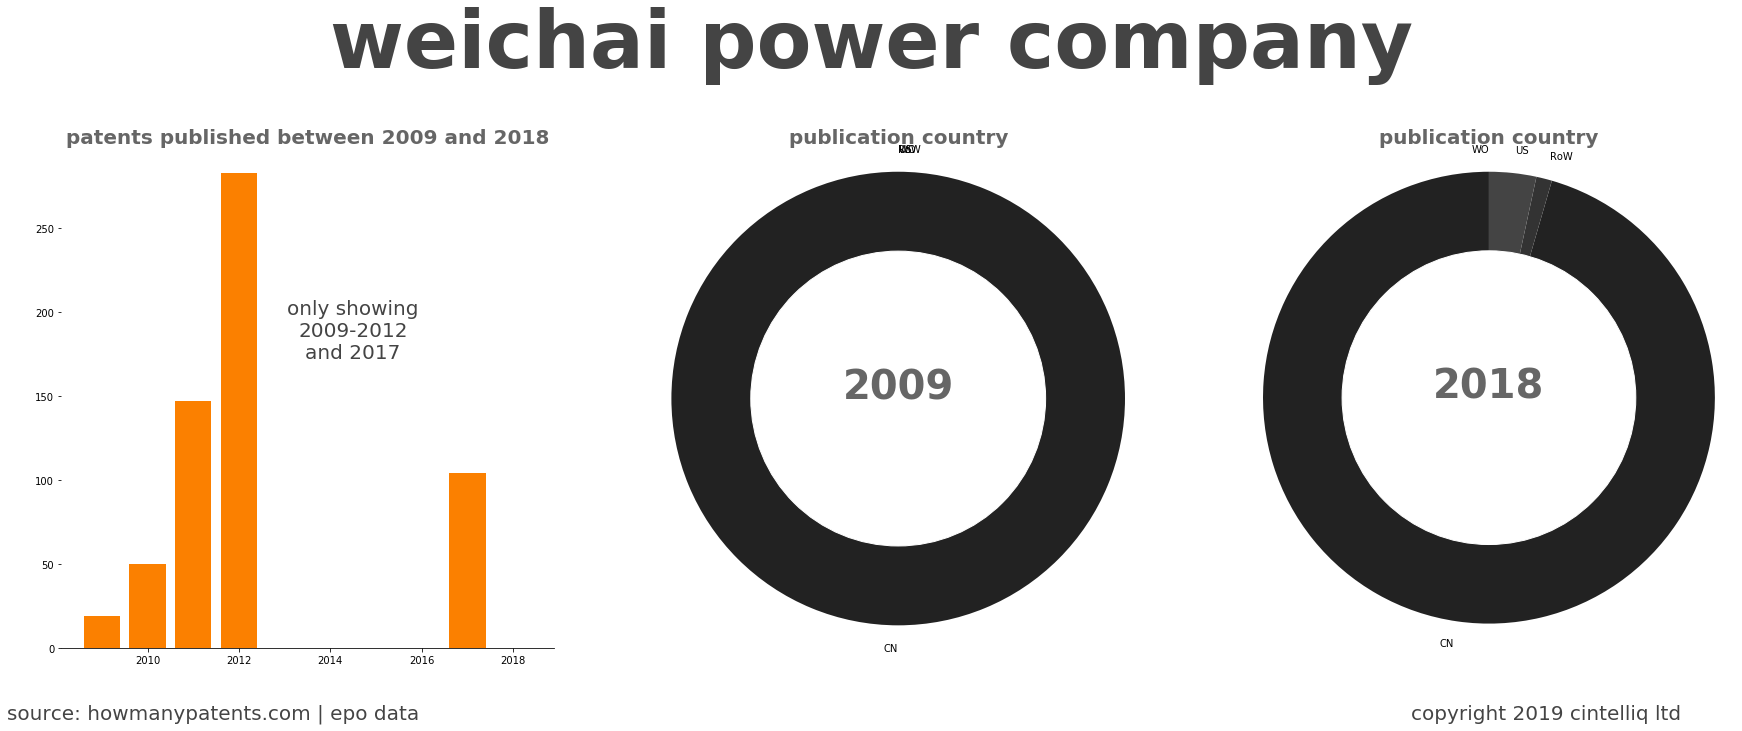 summary of patents for Weichai Power Company